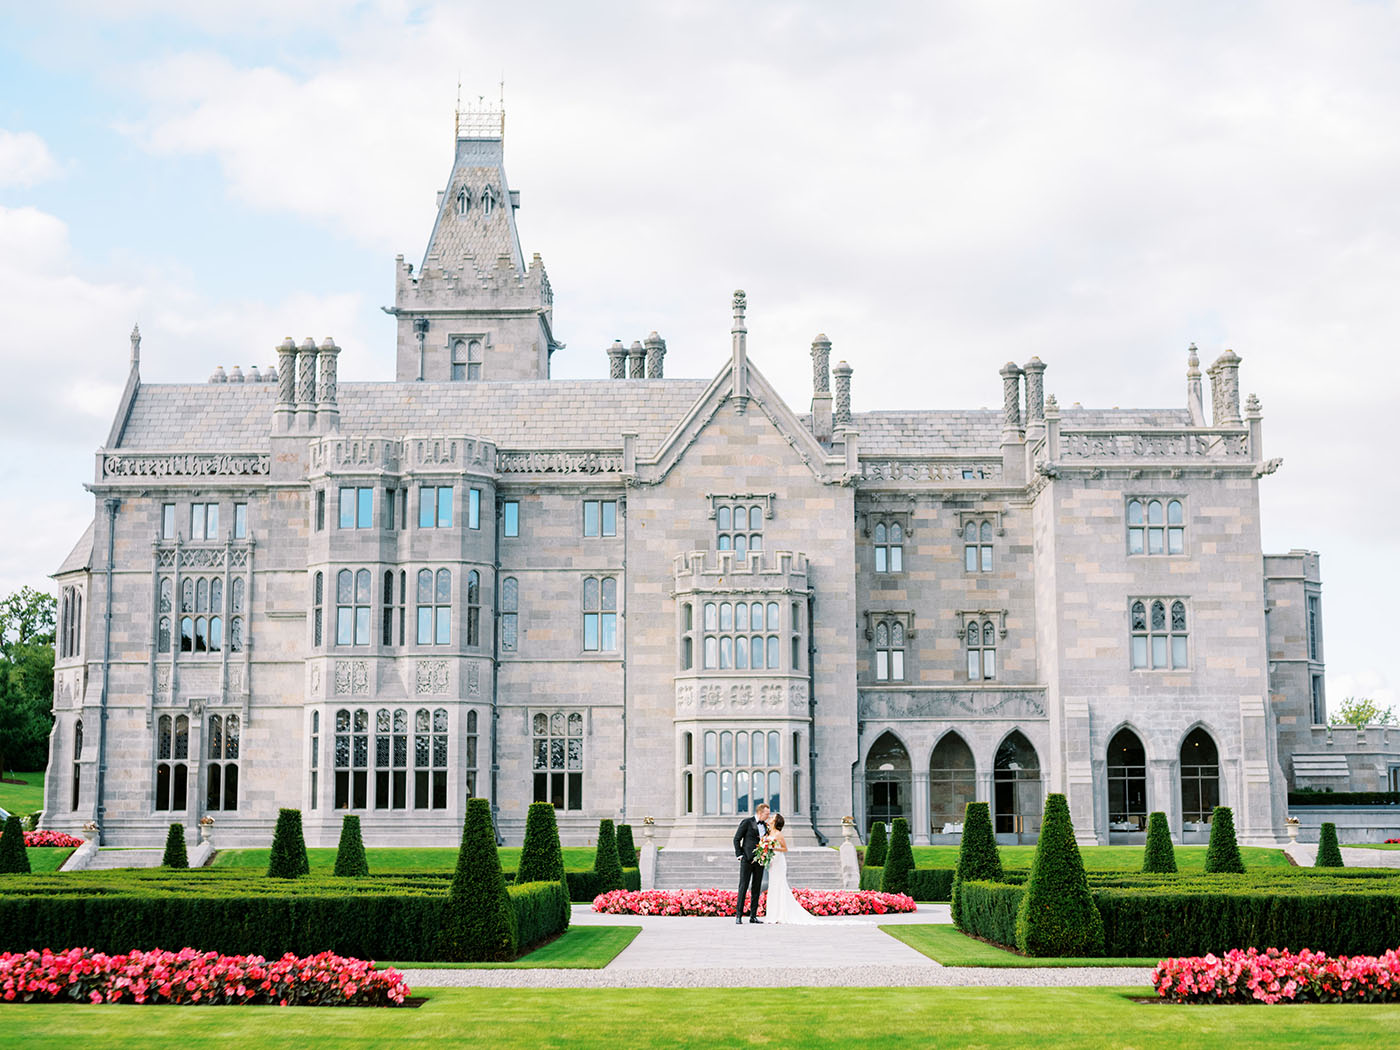 Newly married couple embrace with Adare Manor in the background